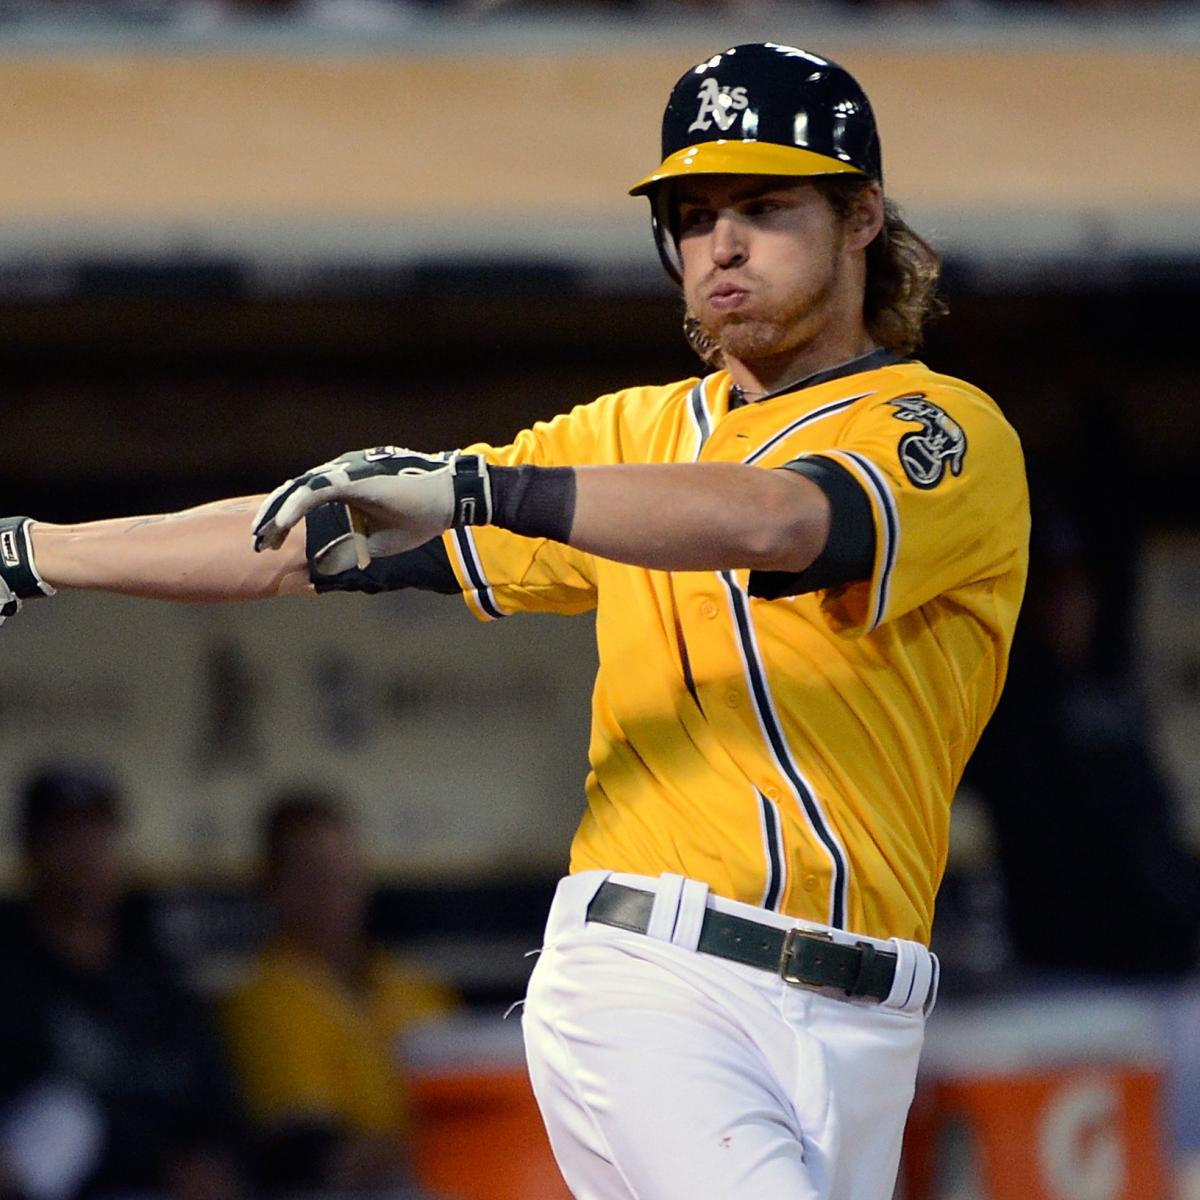 Josh Reddick Hit 5 Home Runs After Changing His Hair to a '7th